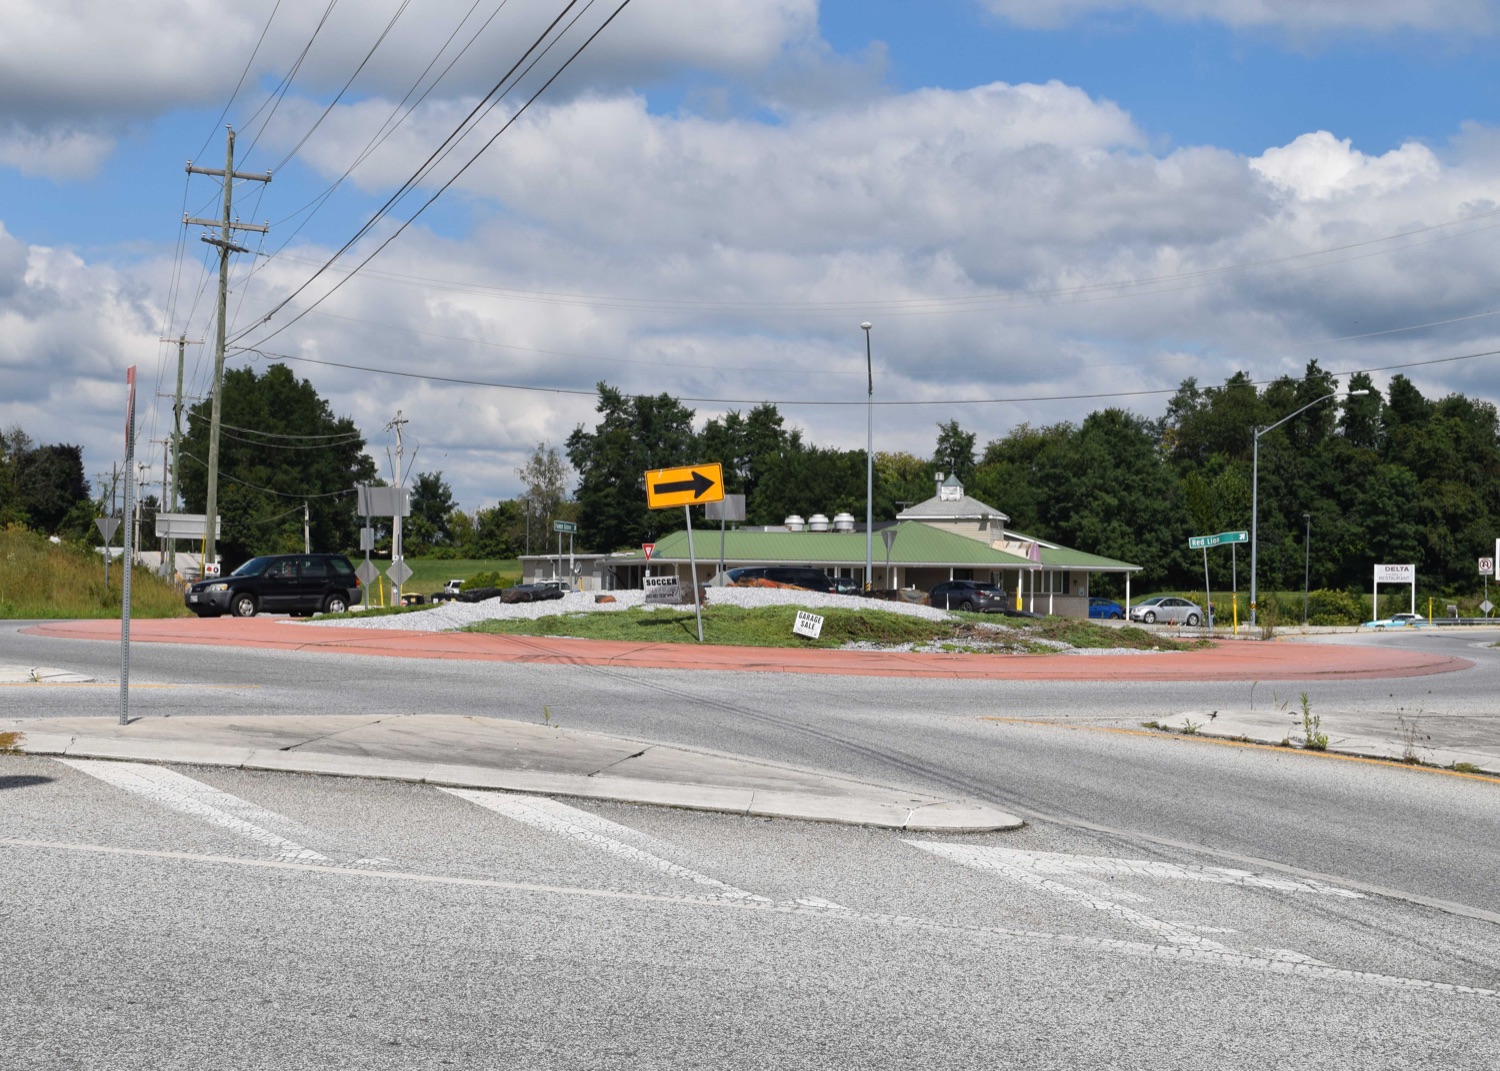 Route 74 (Delta Road) and Bryansville Road<br><a href="https://filesource.amperwave.net/commonwealthofpa/photo/22209_dot_roundabout_photo_10.jpg" target="_blank">⇣ Download Photo</a>